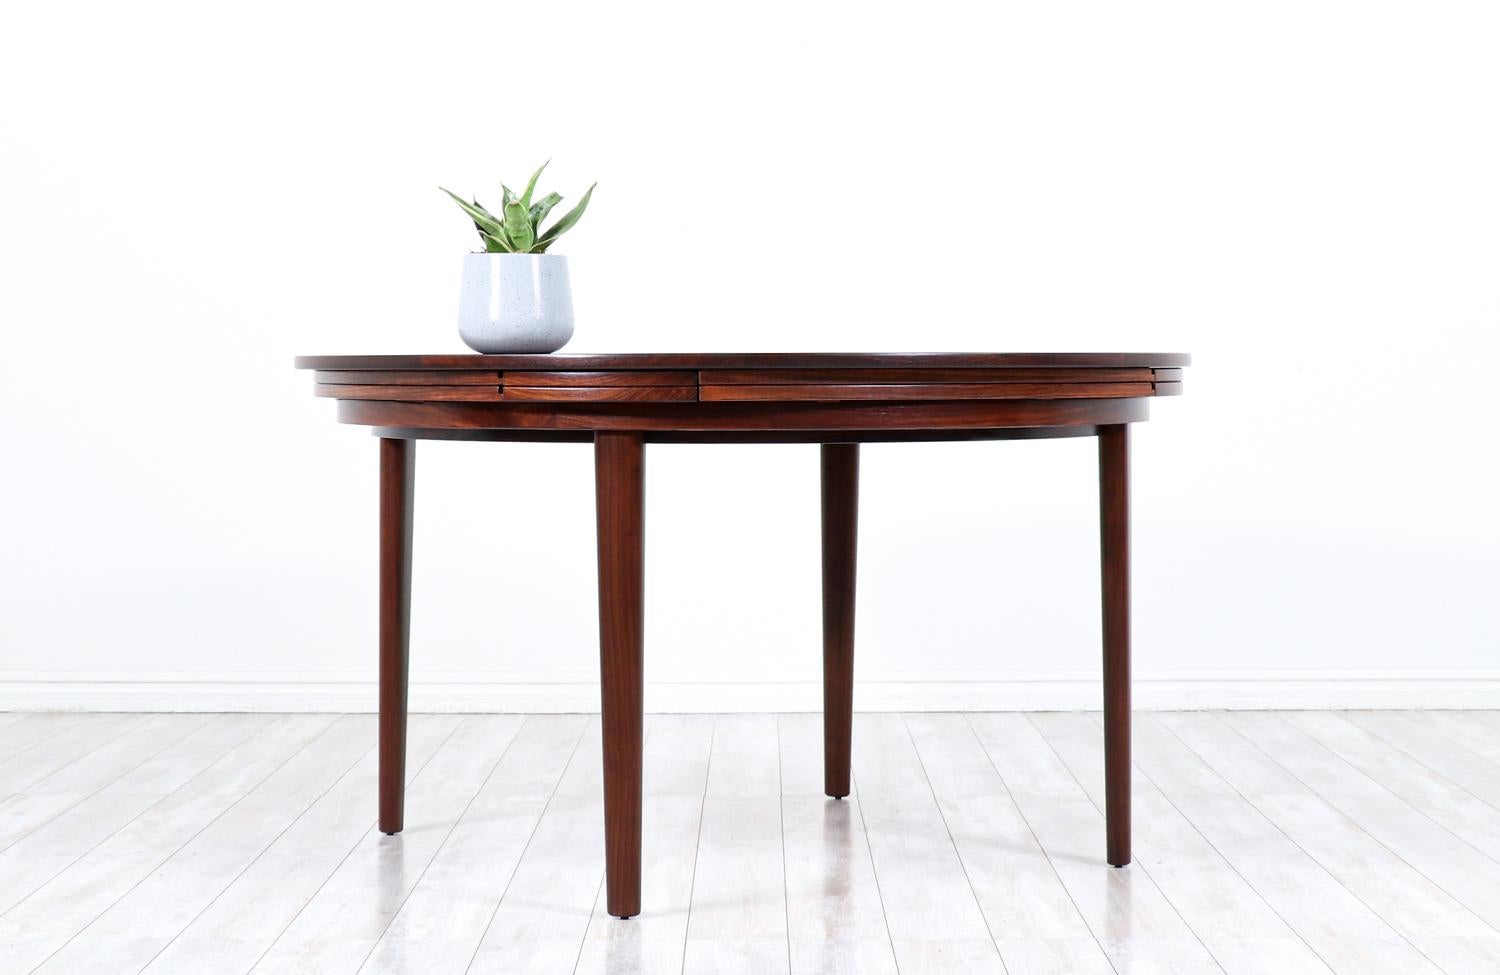 Brass Danish Modern “Flip-Flap” Expanding Rosewood Dining Table by Dyrlund